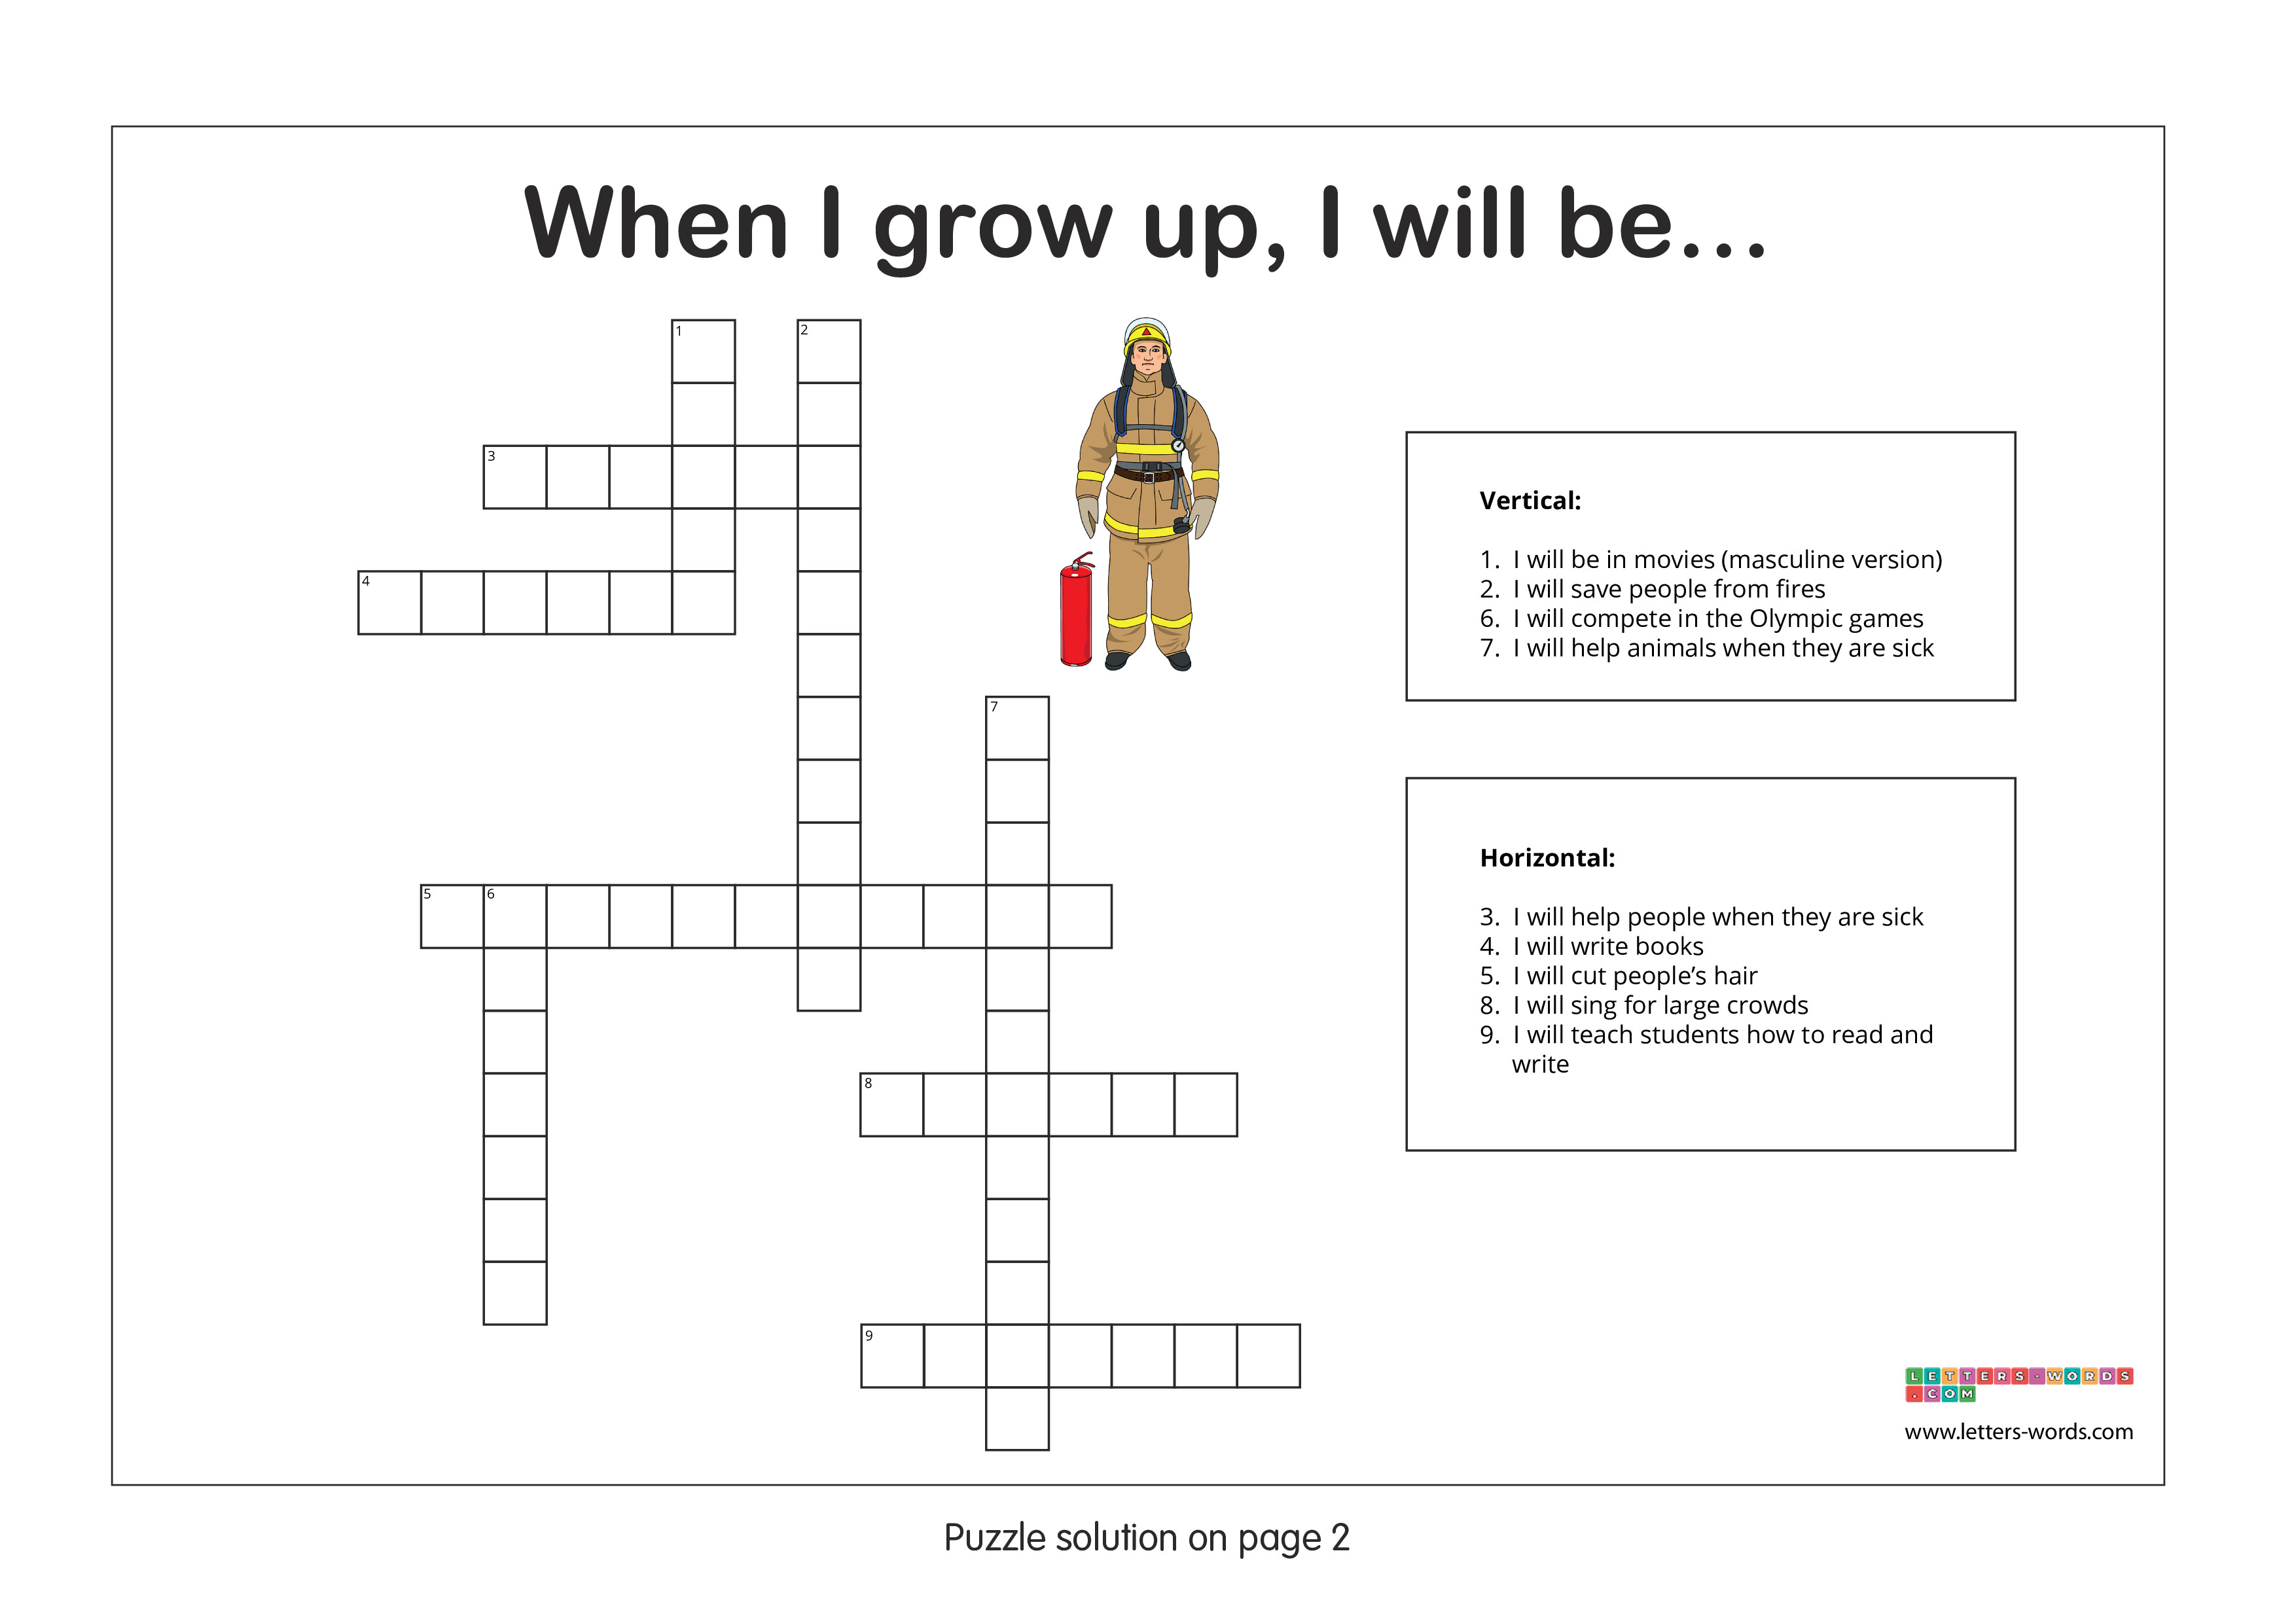 Elementary School Students Crossword Puzzle - When i grow up, i will be...